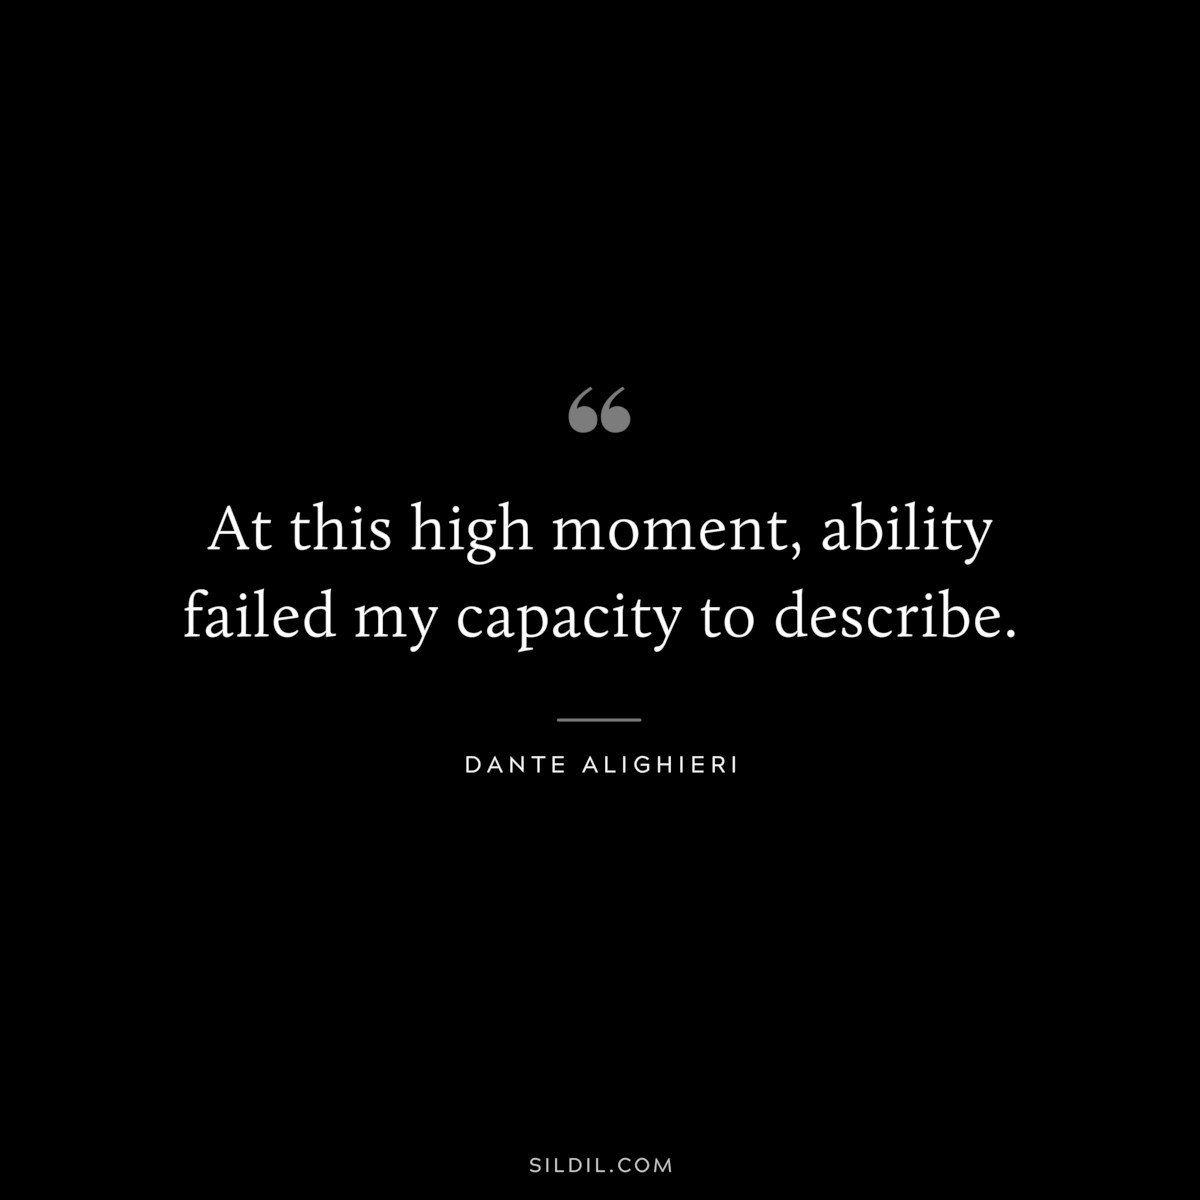 At this high moment, ability failed my capacity to describe. ― Dante Alighieri